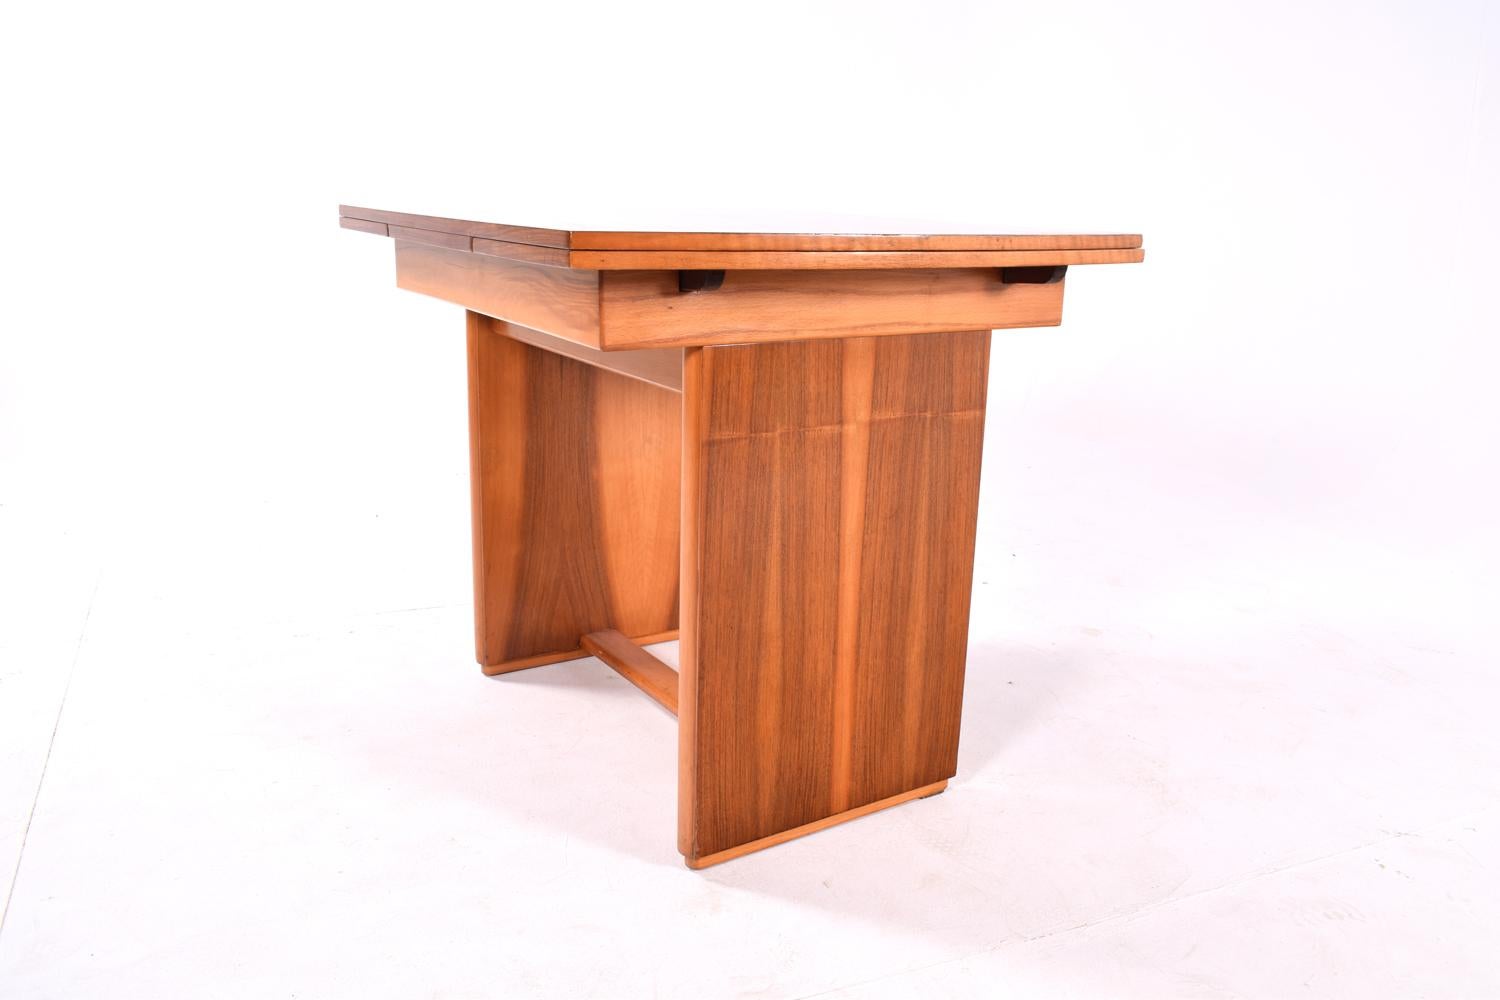 A blond walnut extending dining table made in the 1930s. Extending leaves with 27 cm each, pullout / pull-out at each end. The table is in overall good condition. Restored.
Beautiful walnut matching veneer. Geometric and simple